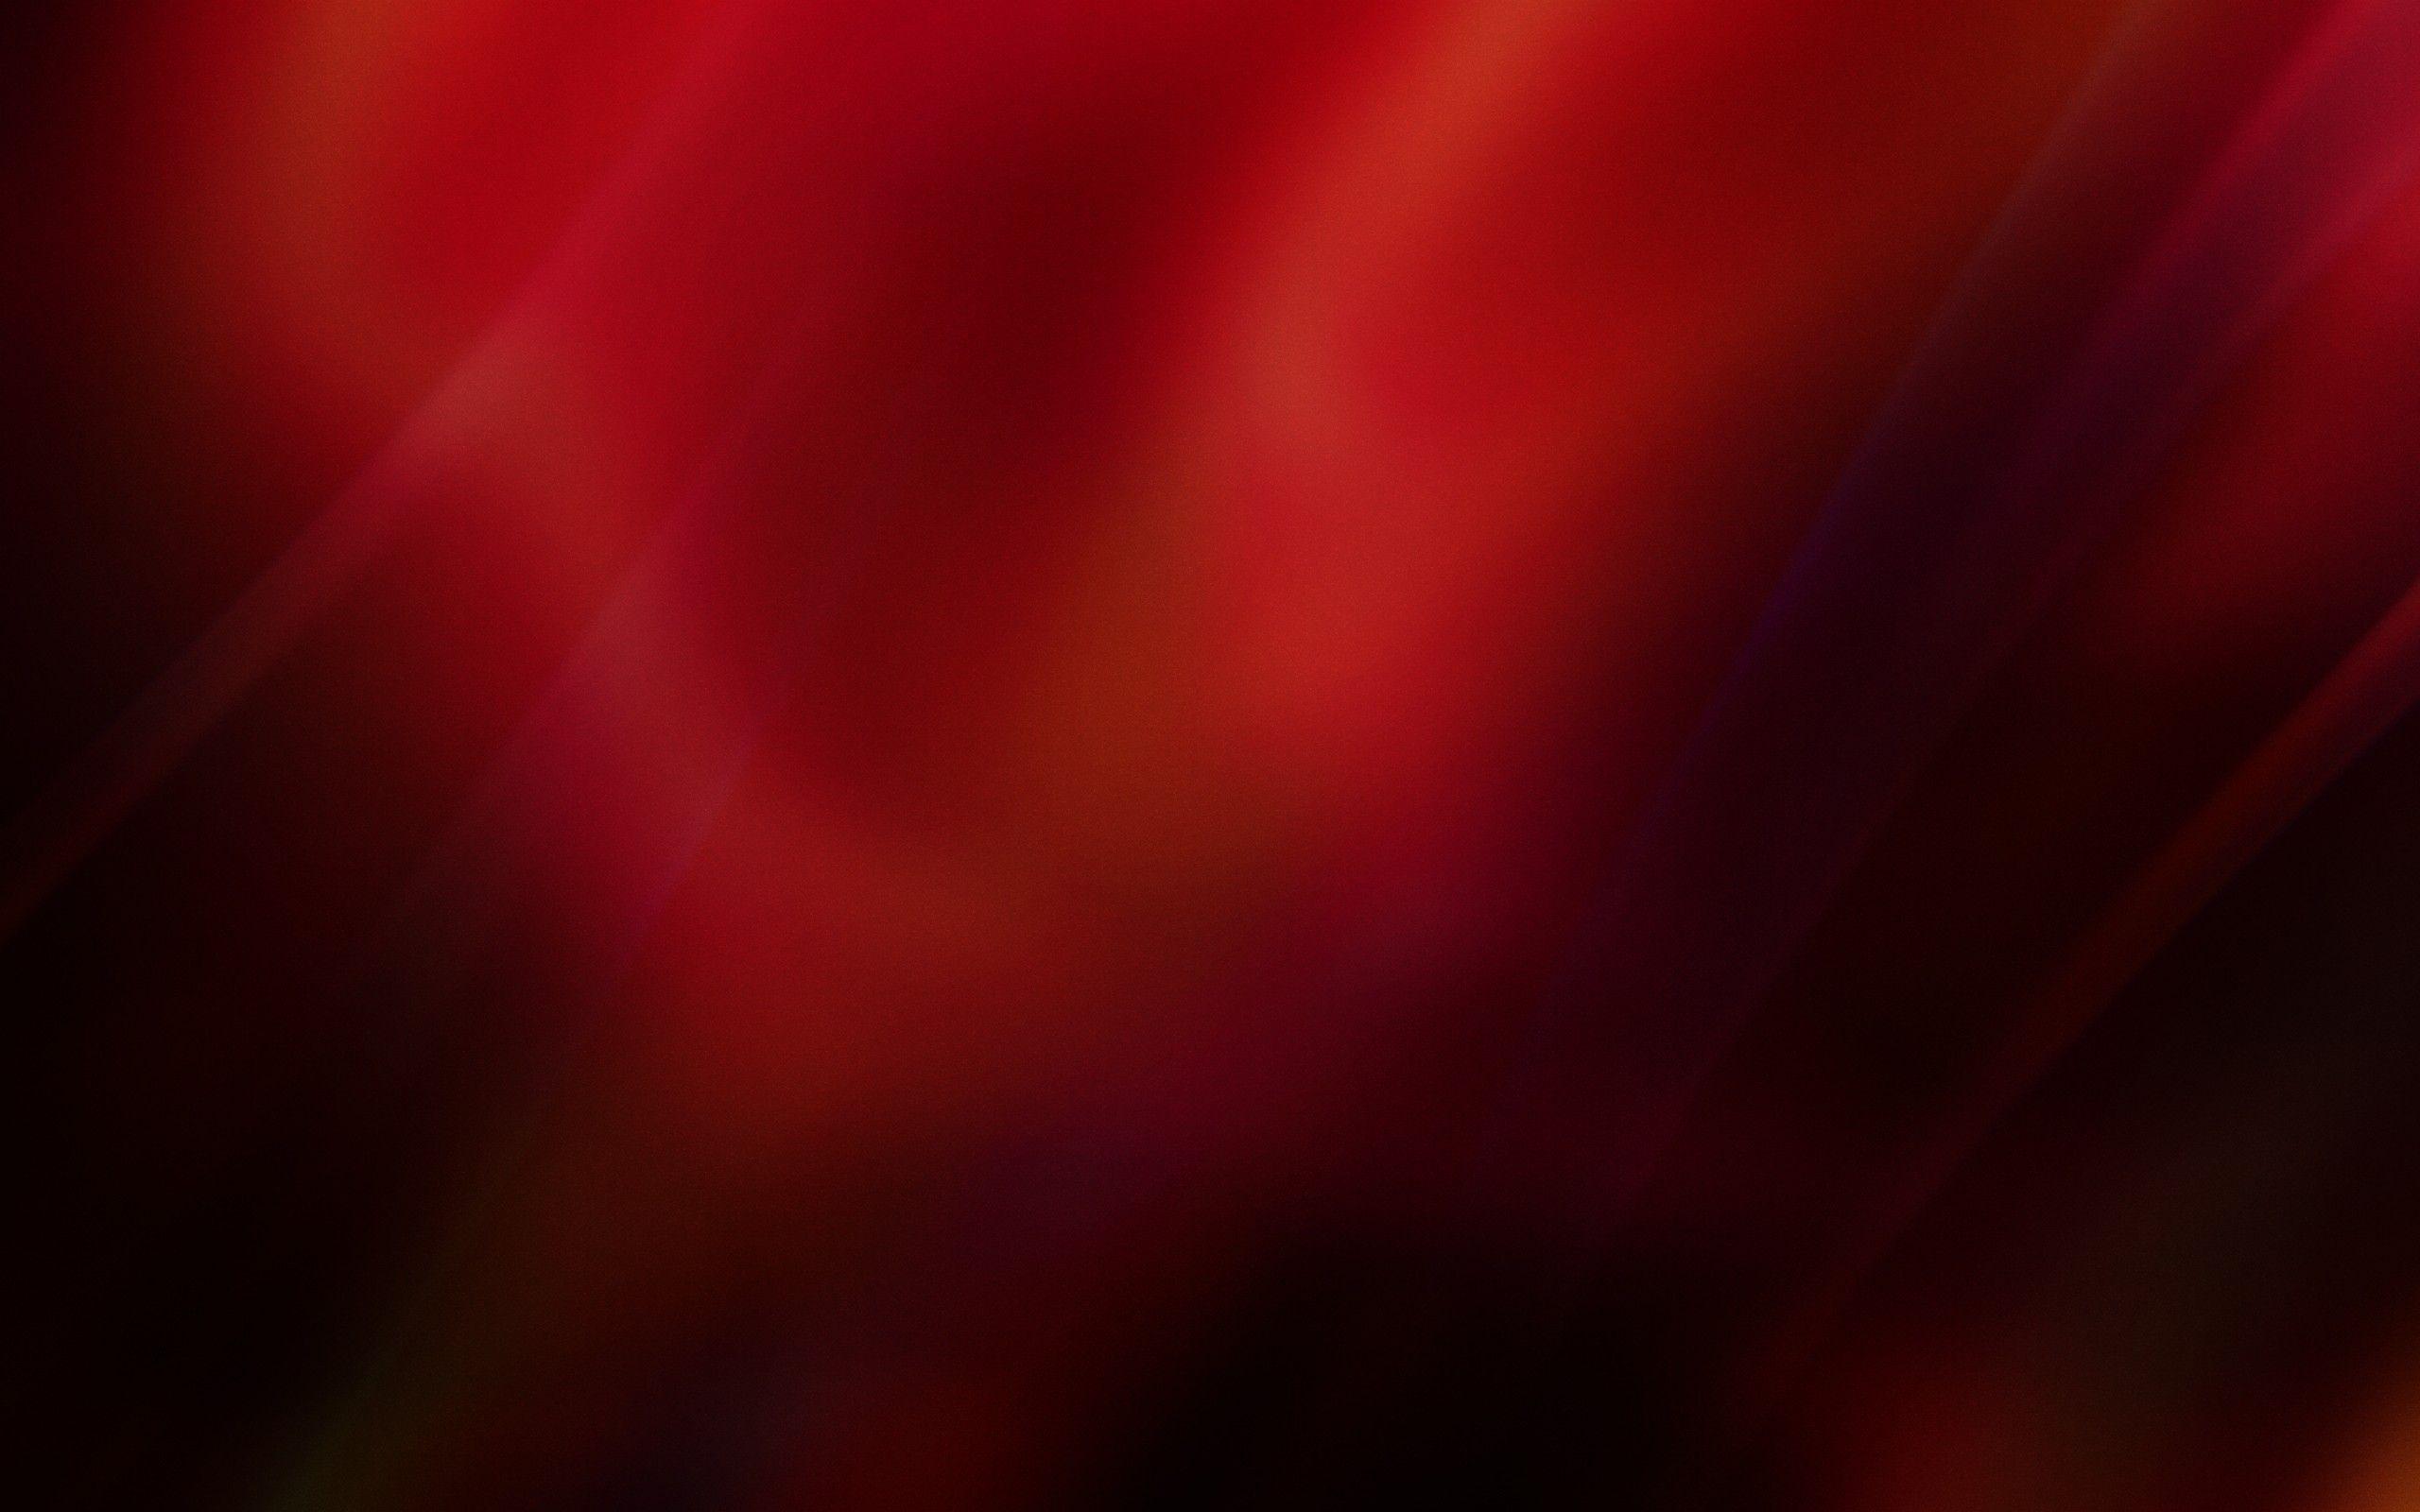 Red and Black backgroundDownload free amazing background